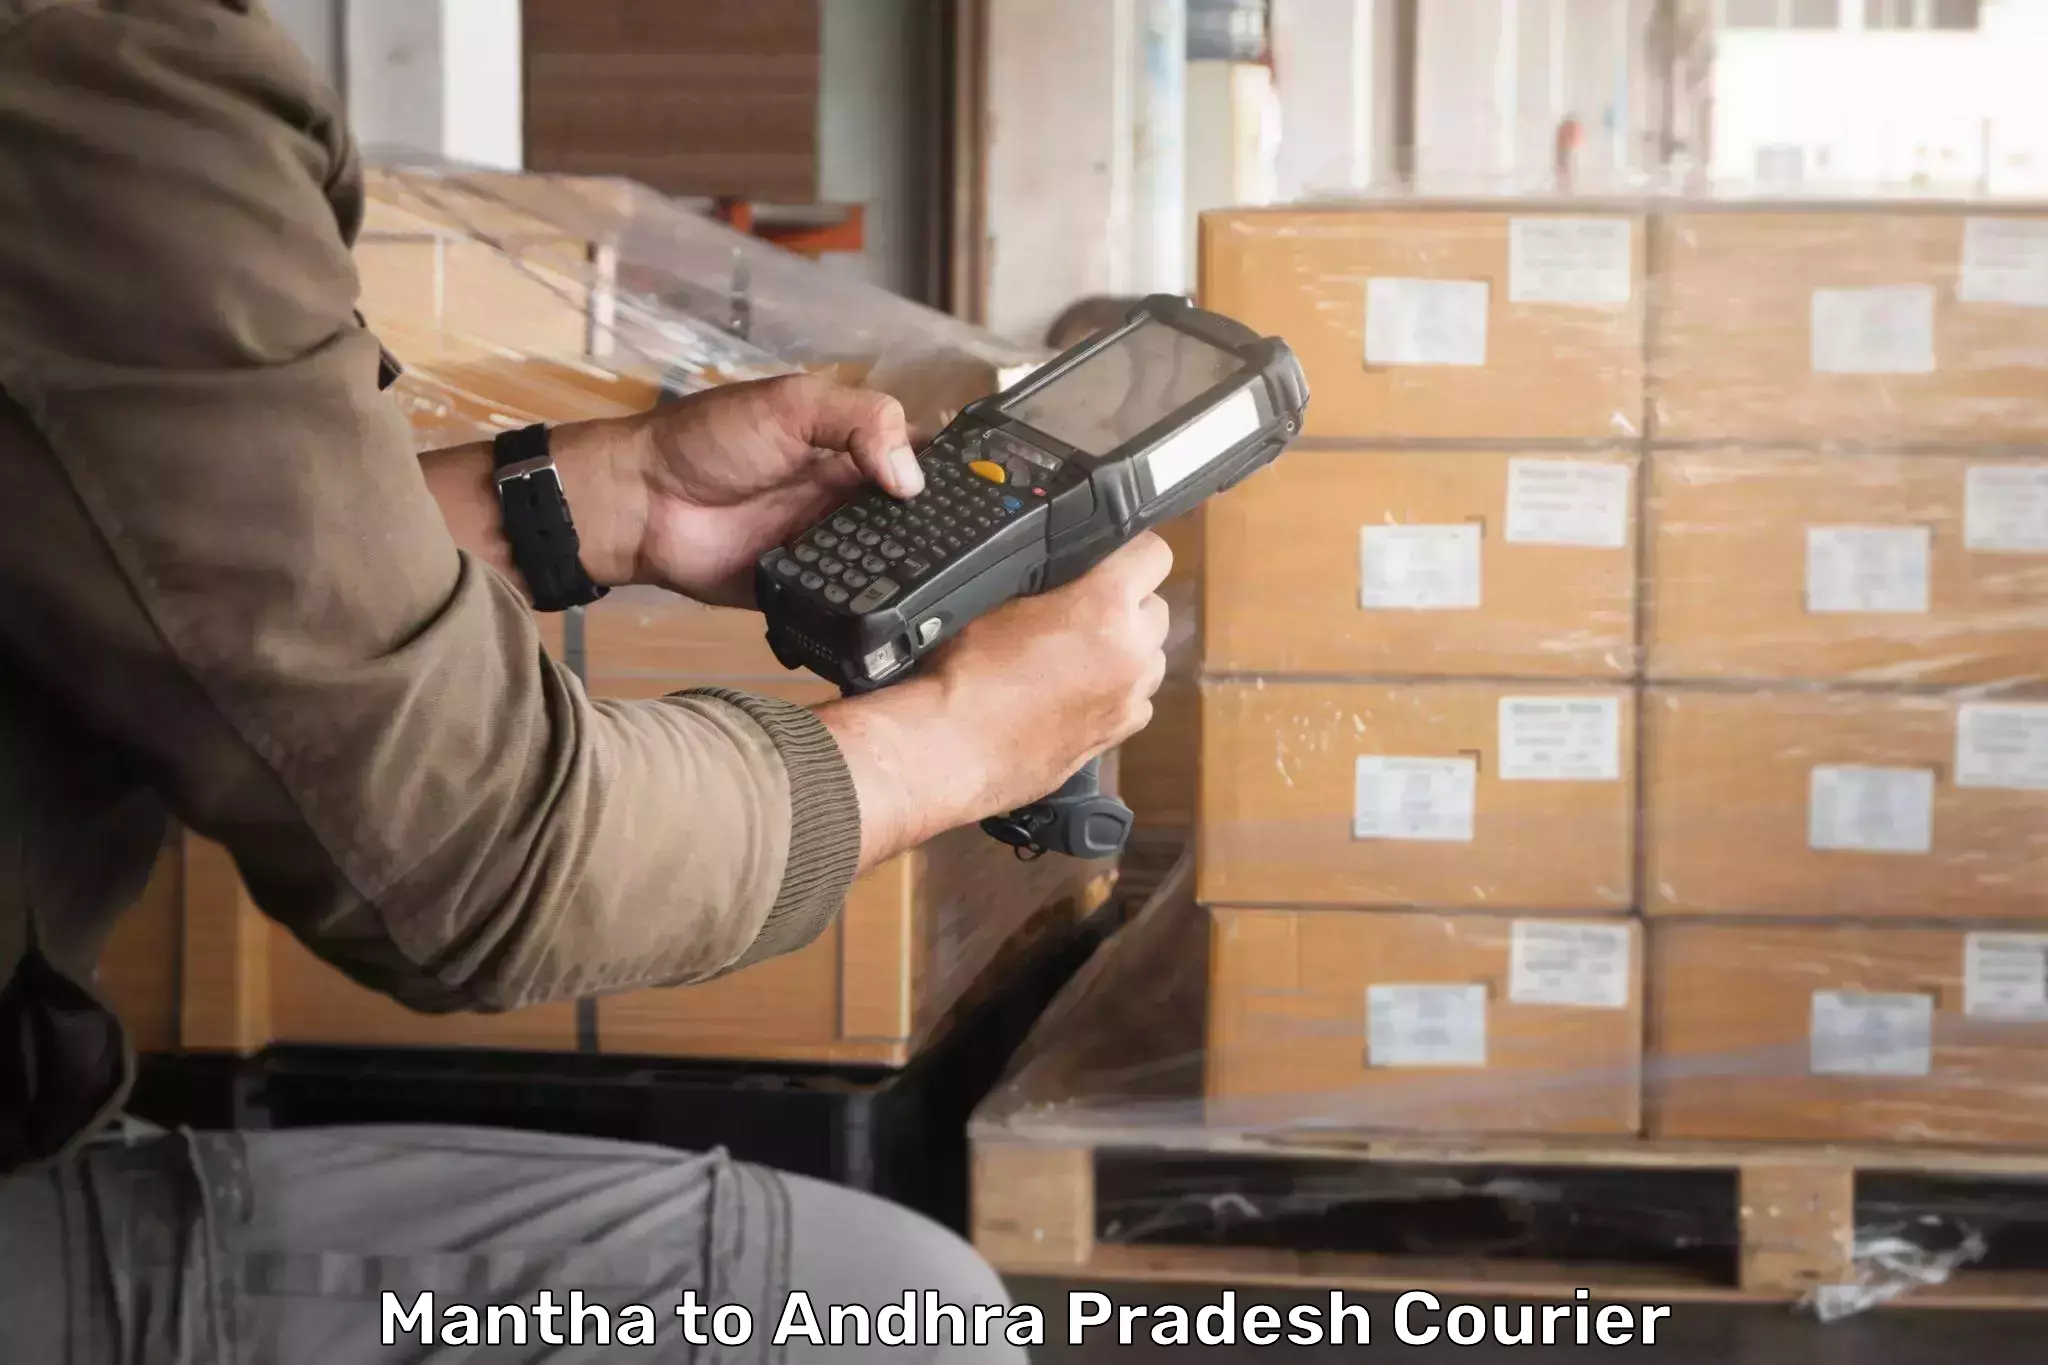 Efficient courier operations Mantha to Visakhapatnam Port